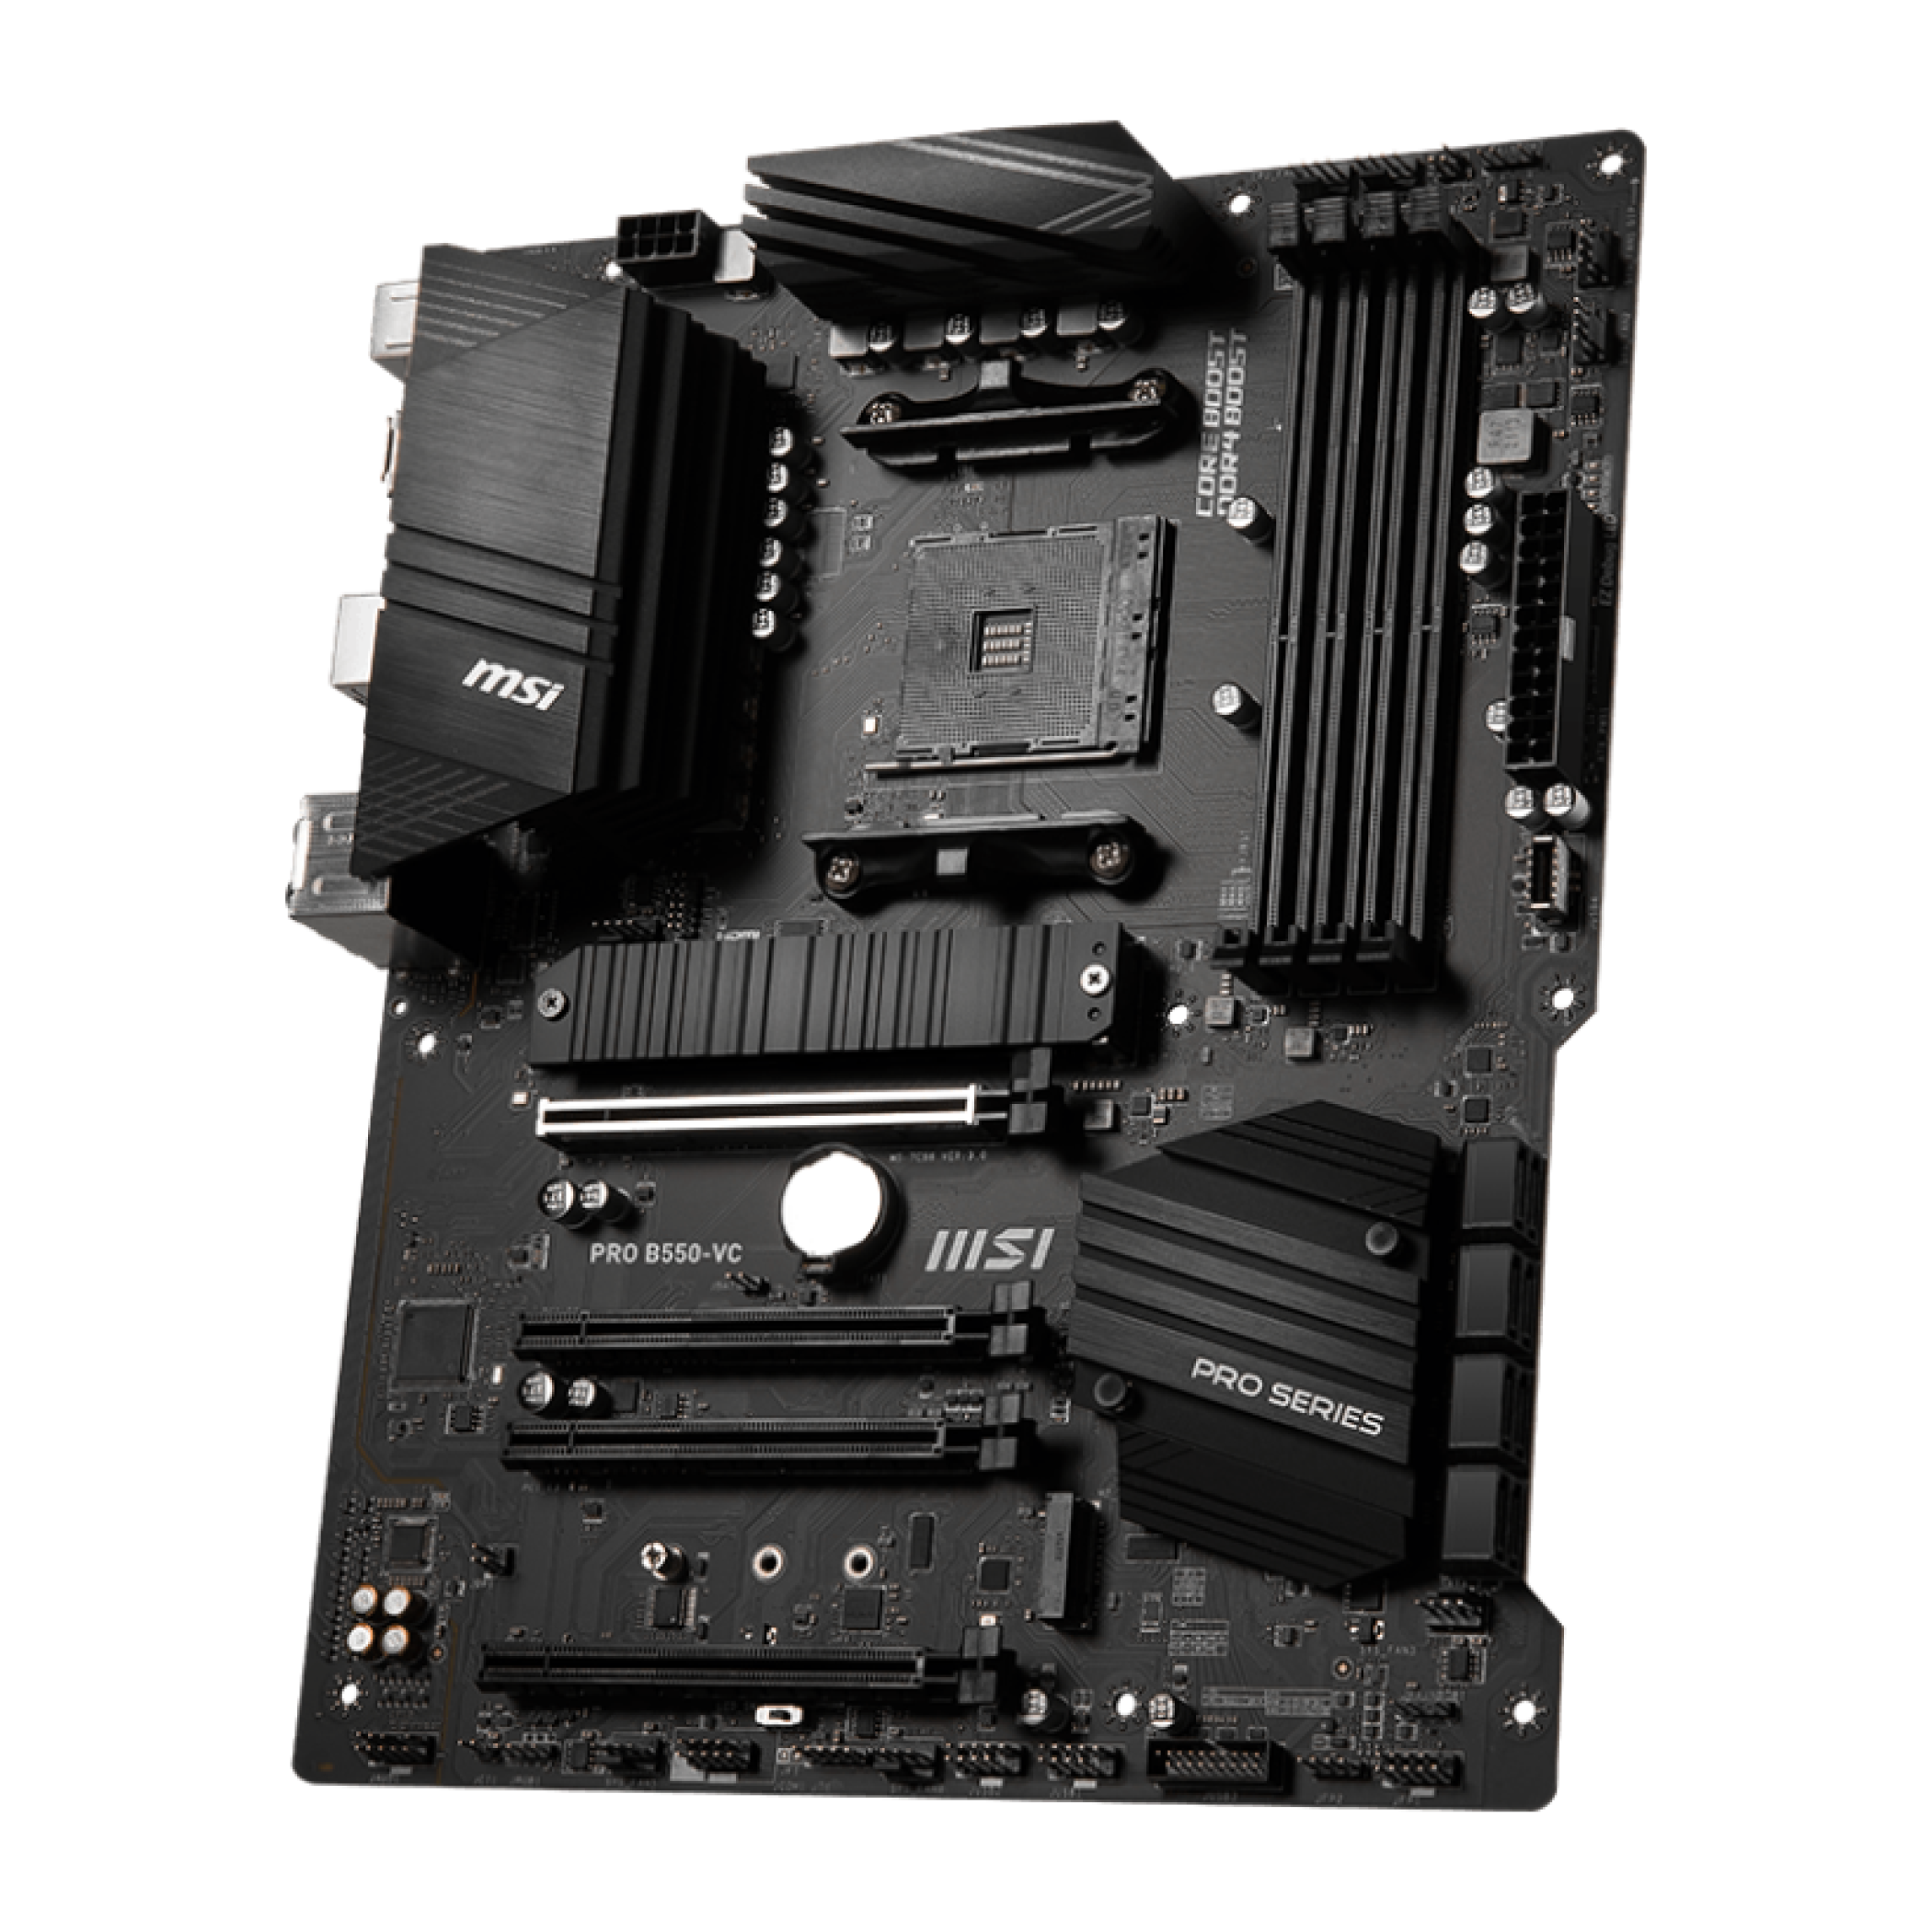 The MSI B550-VC PRO ProSeries motherboard.